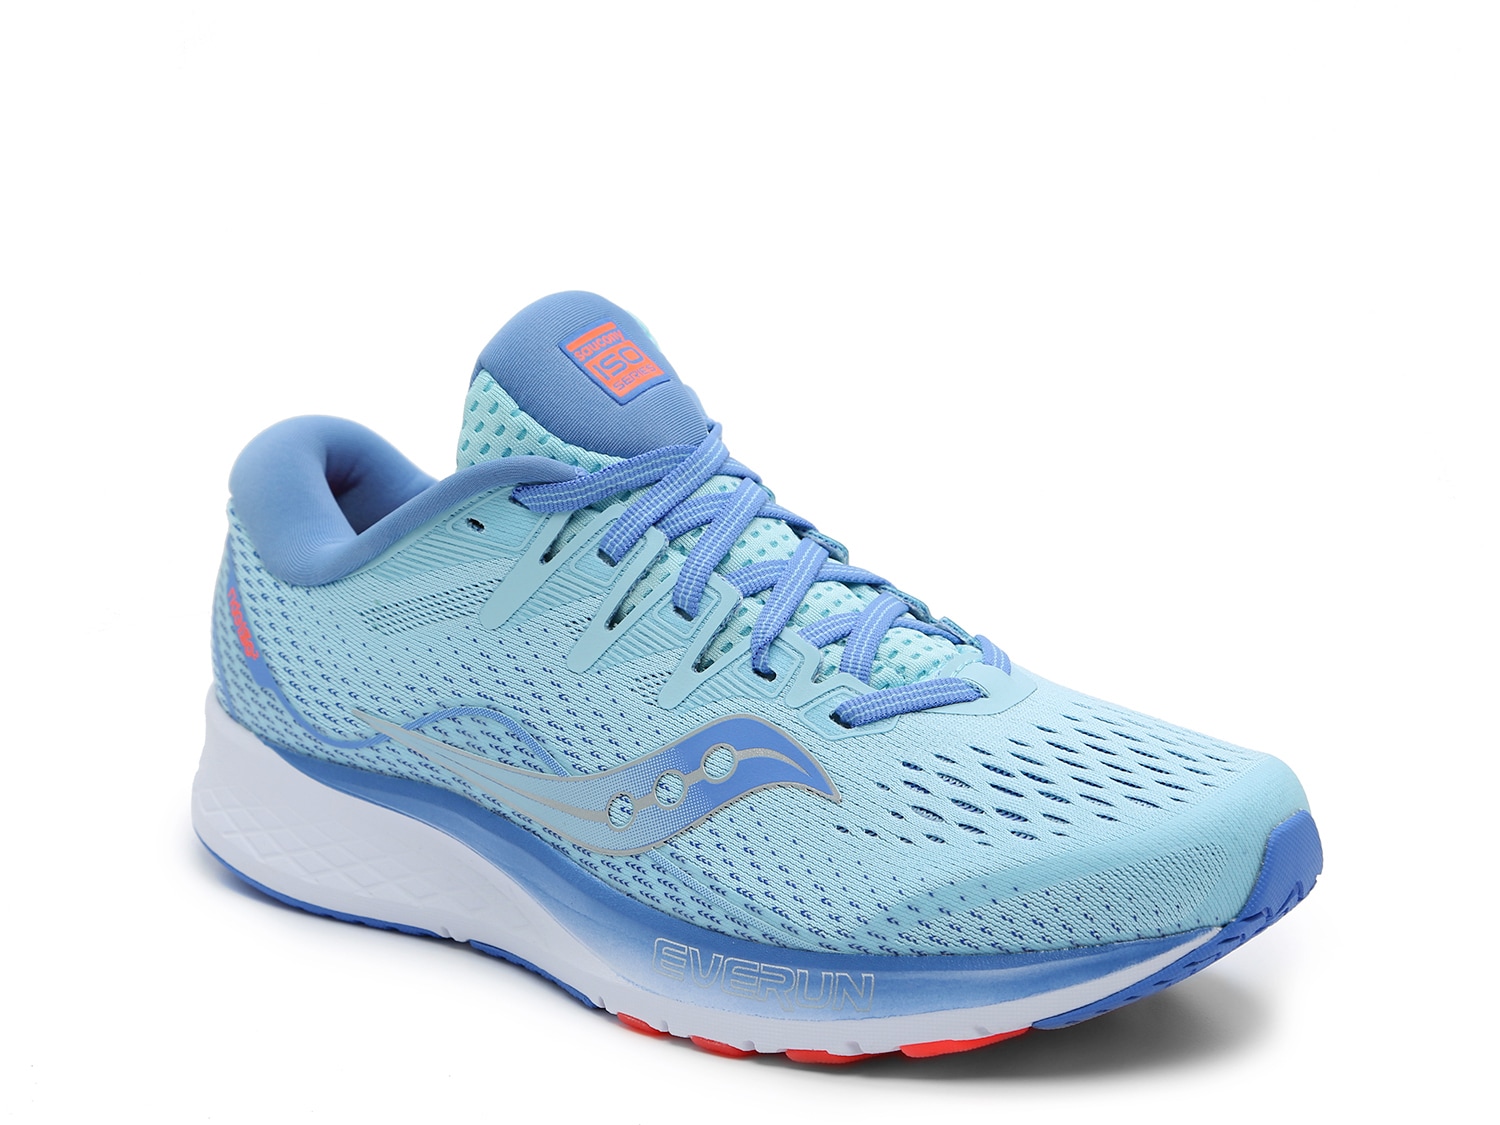 Saucony Shoes, Sneakers, Running Shoes 